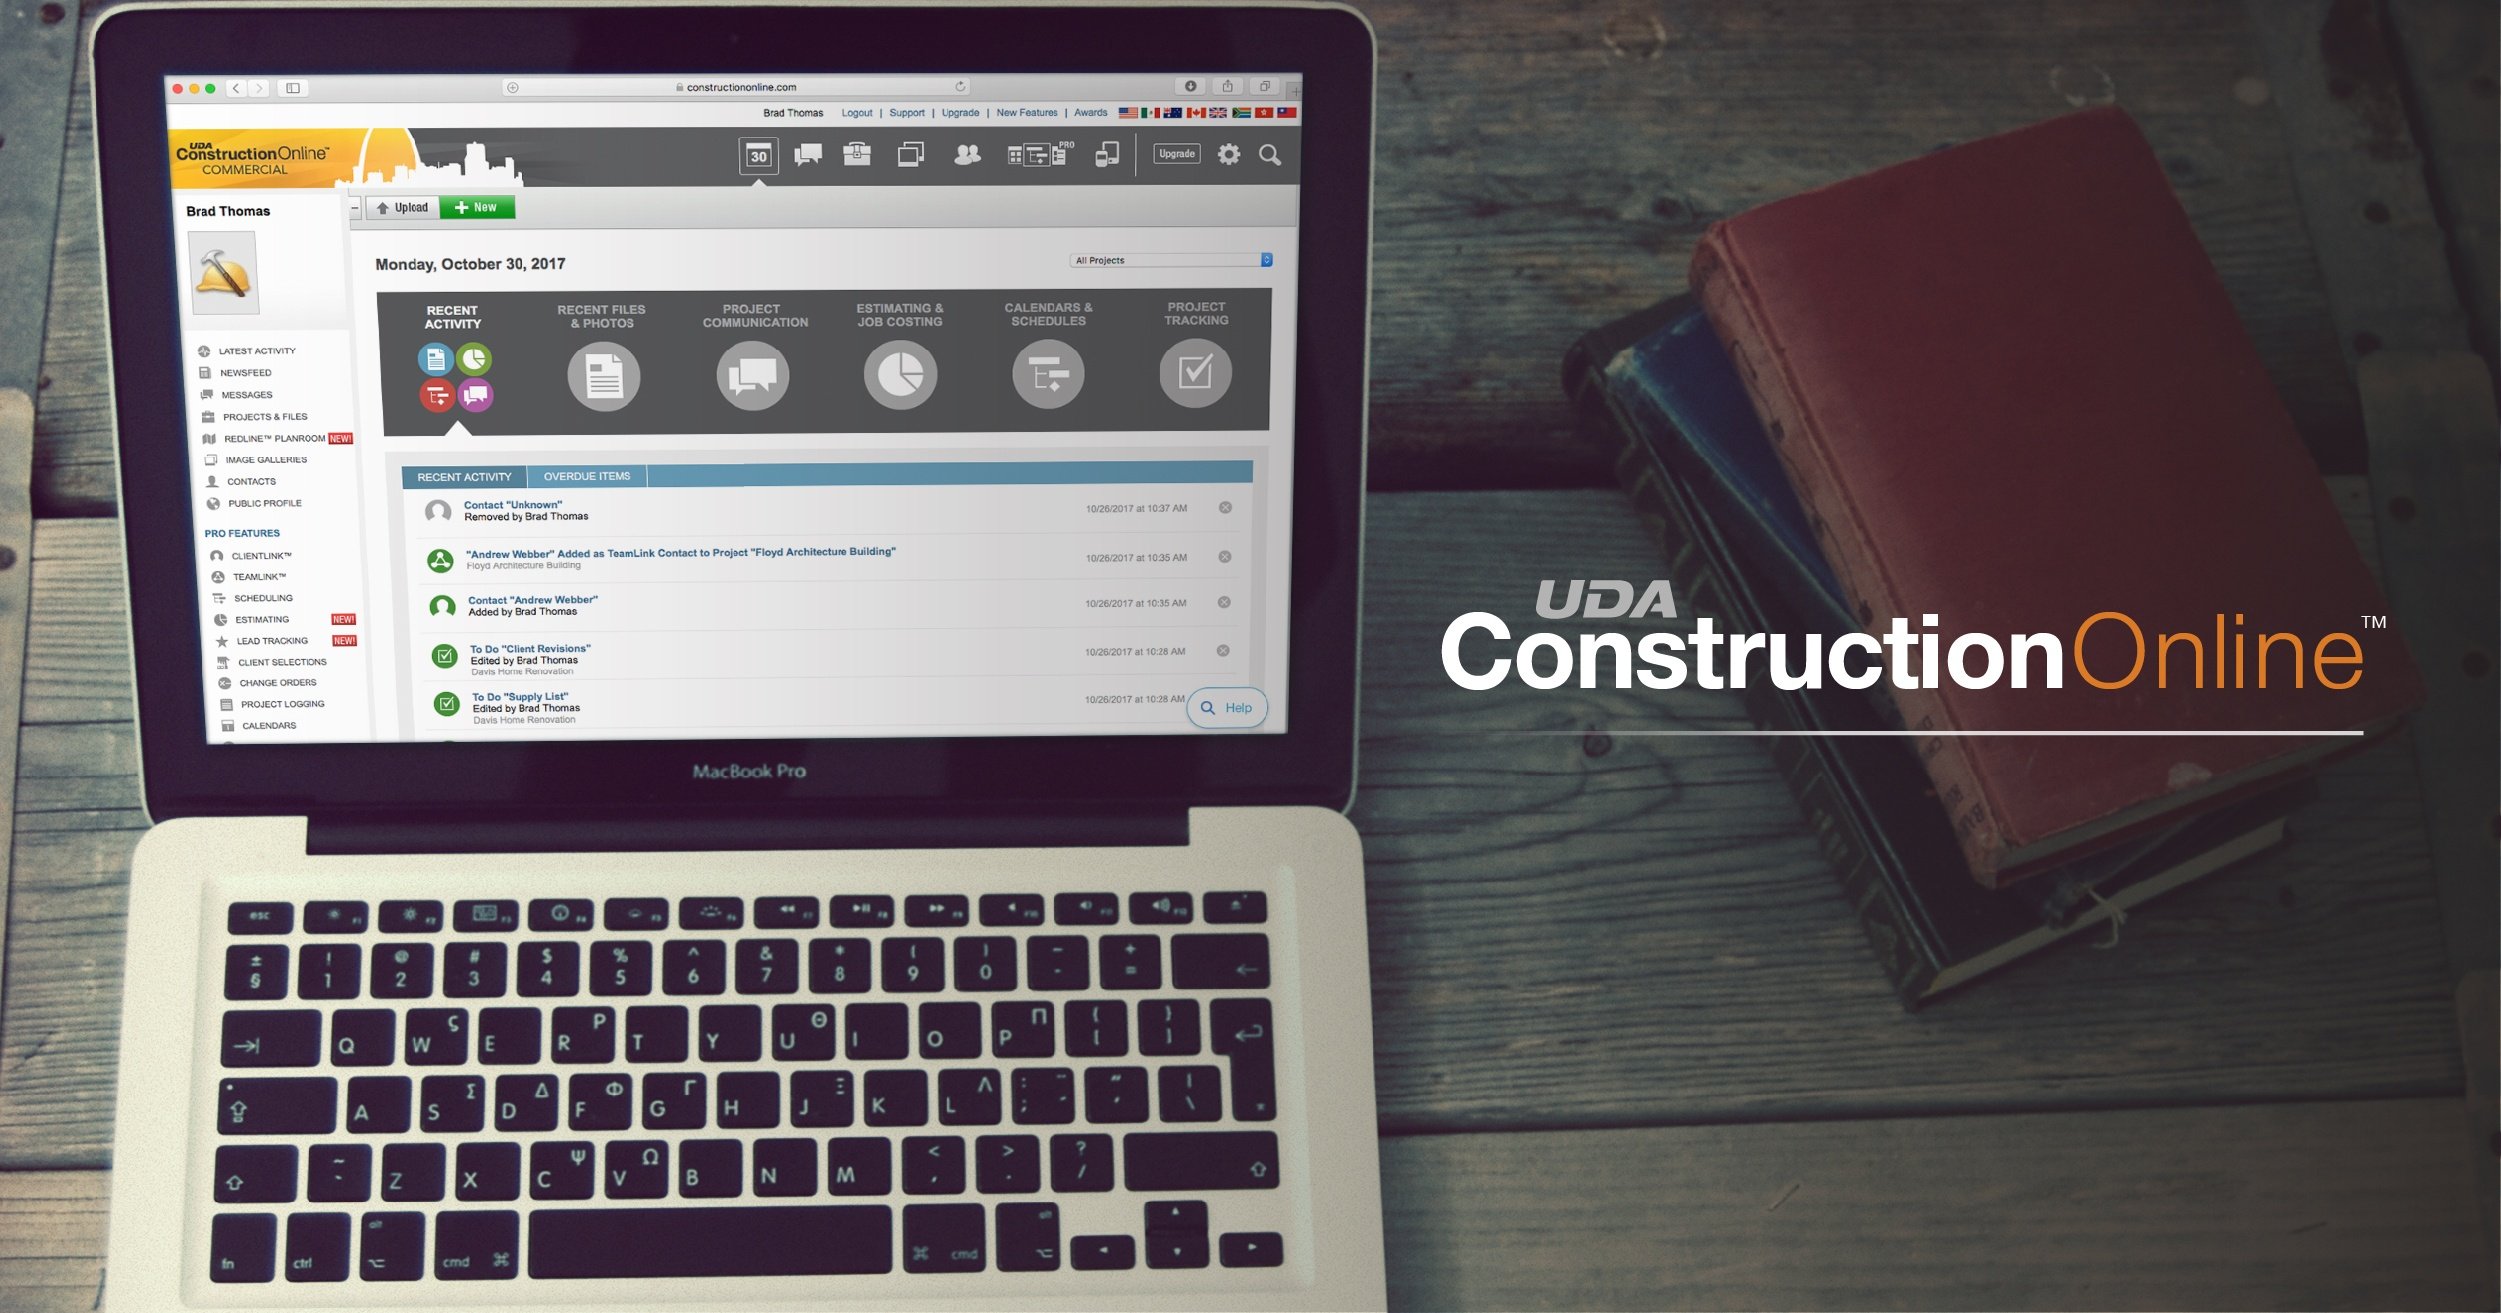 5 Easy Steps to Becoming a ConstructionOnline Power User